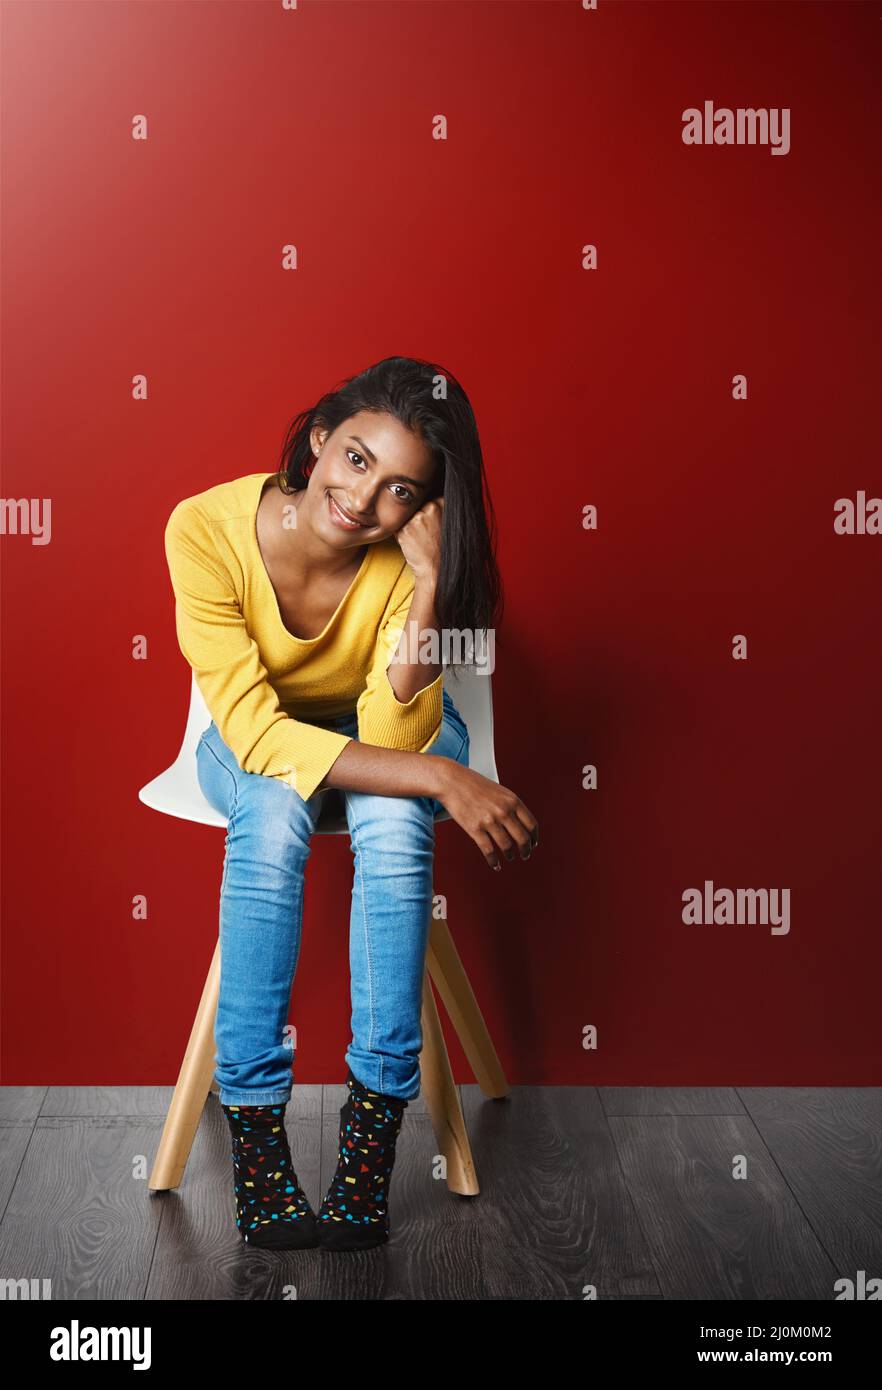 Be just you and youll be beautiful. Studio portrait of a beautiful young woman sitting on a chair against a red background. Stock Photo